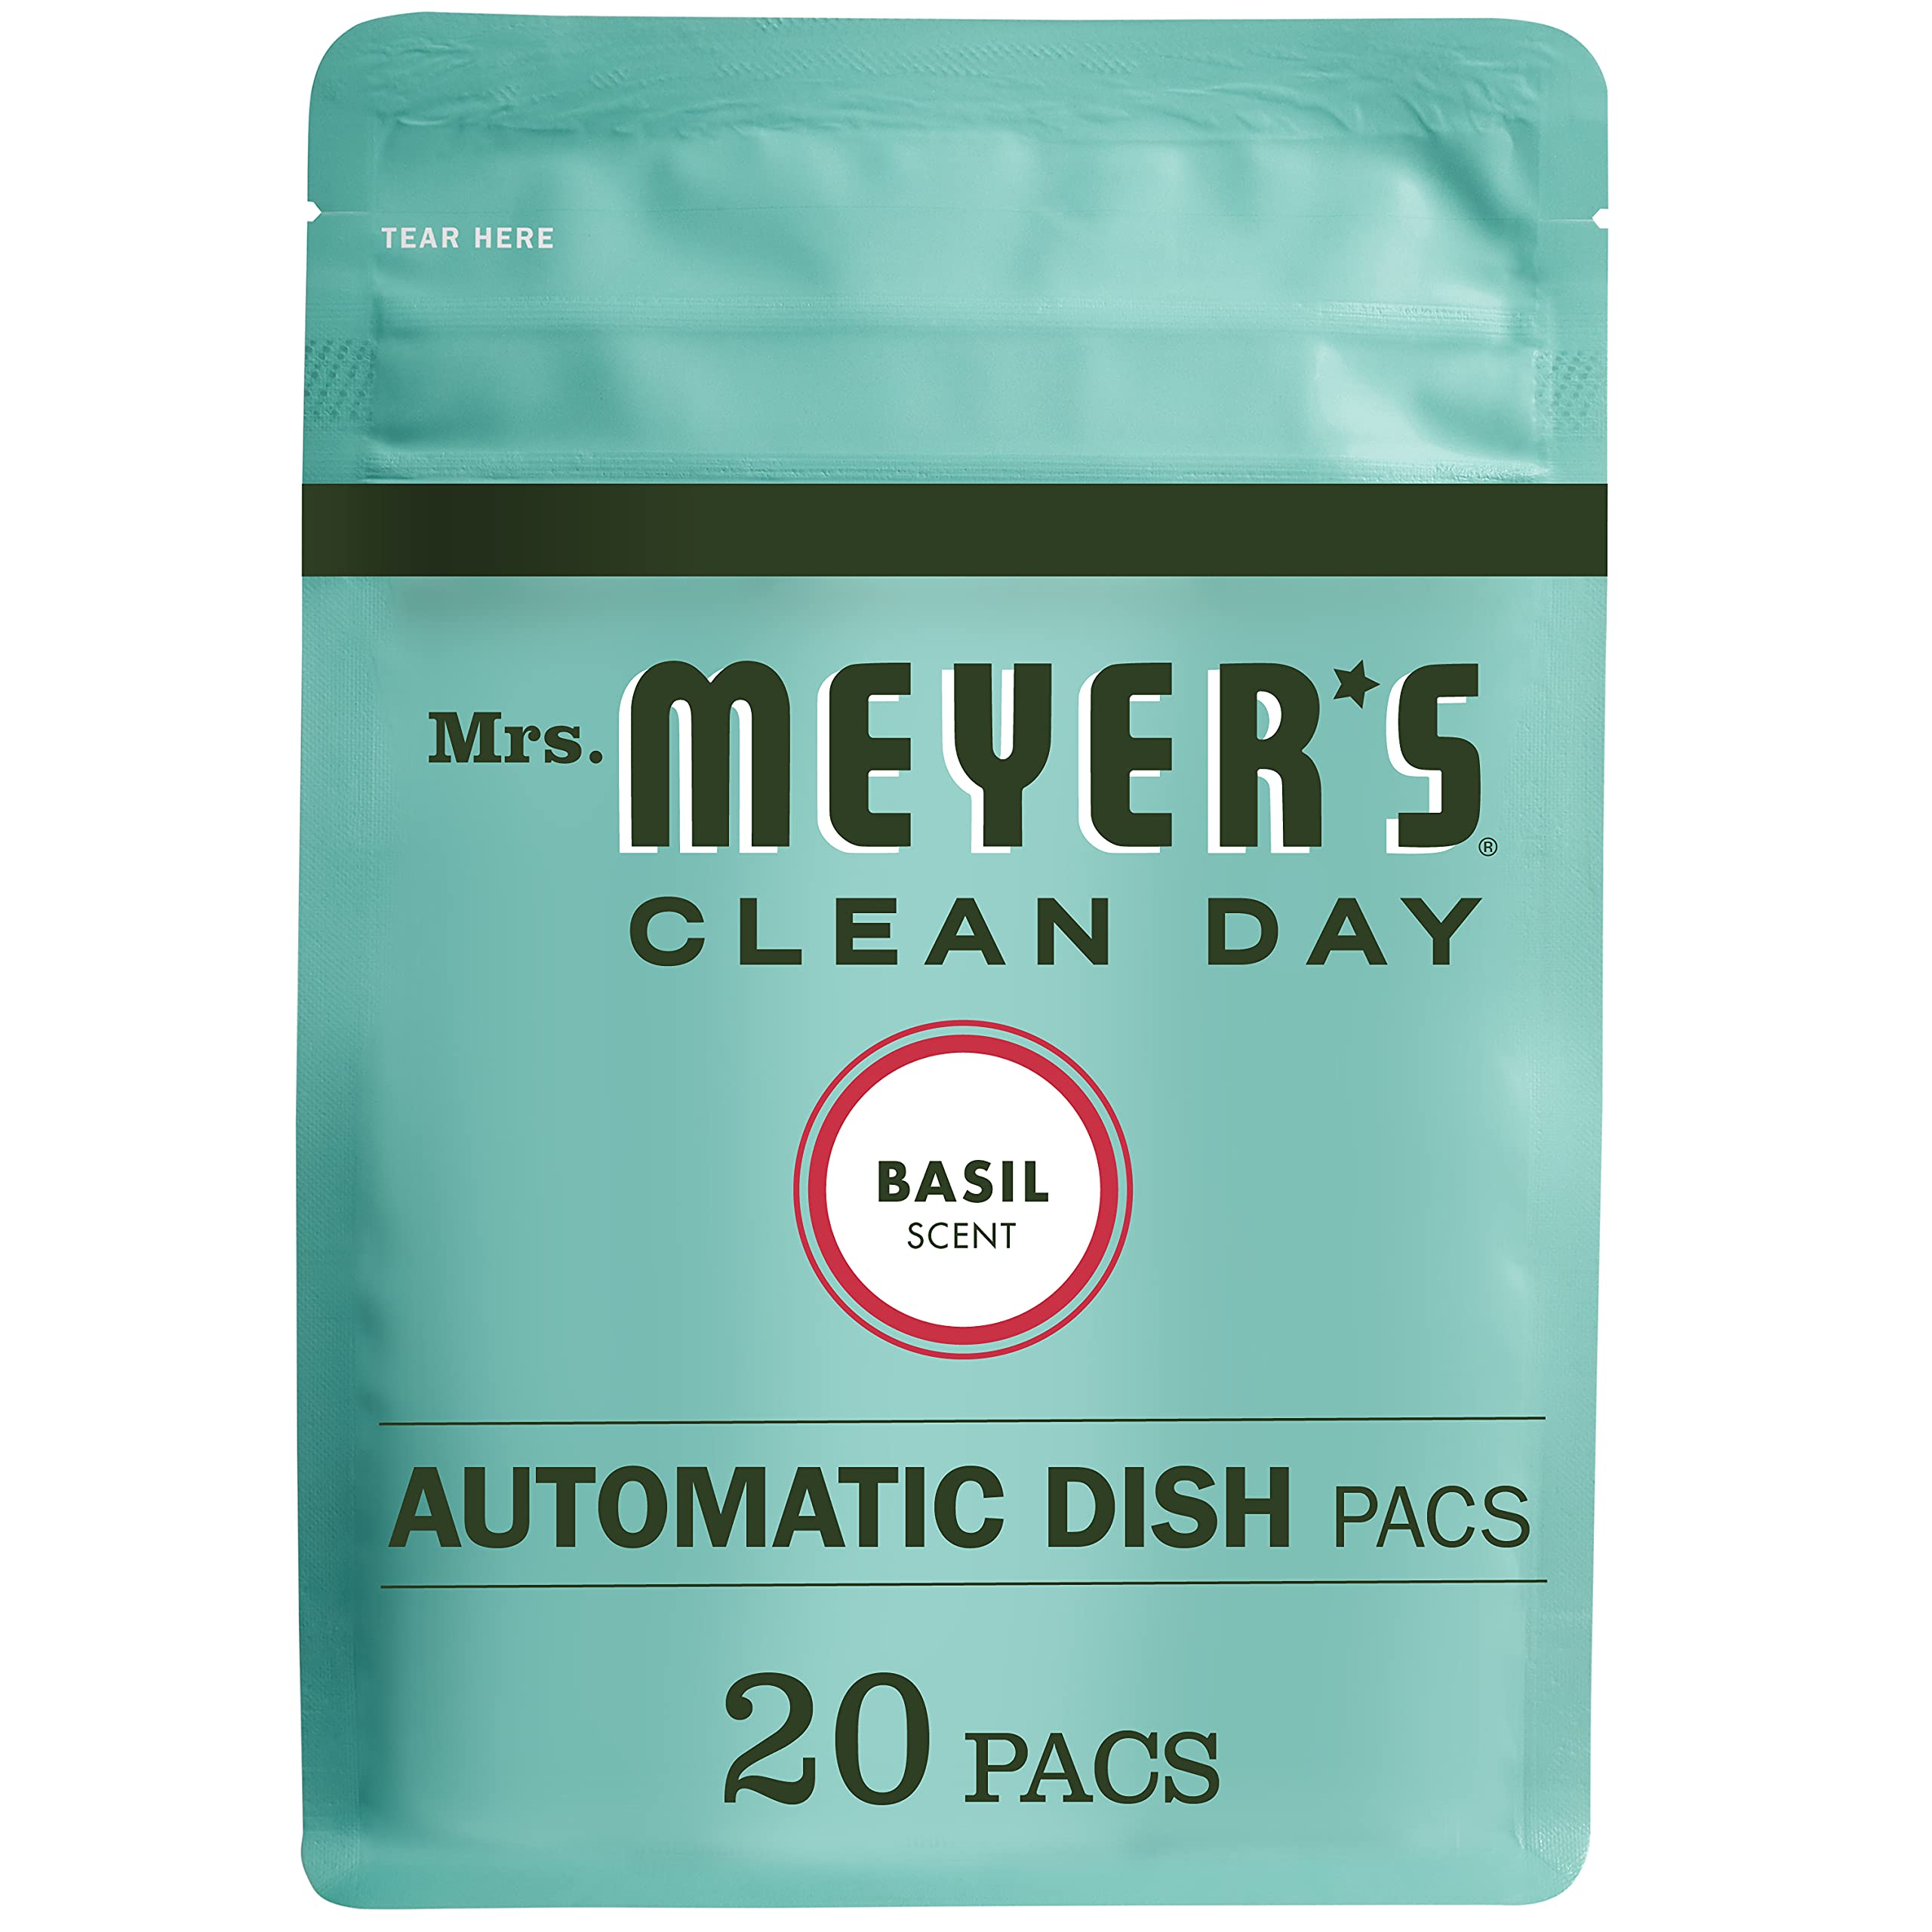 Mrs. Meyer's Clean Day Automatic Dish Pillow Basil Detergent Pods, 12.7 Oz. 20 Count